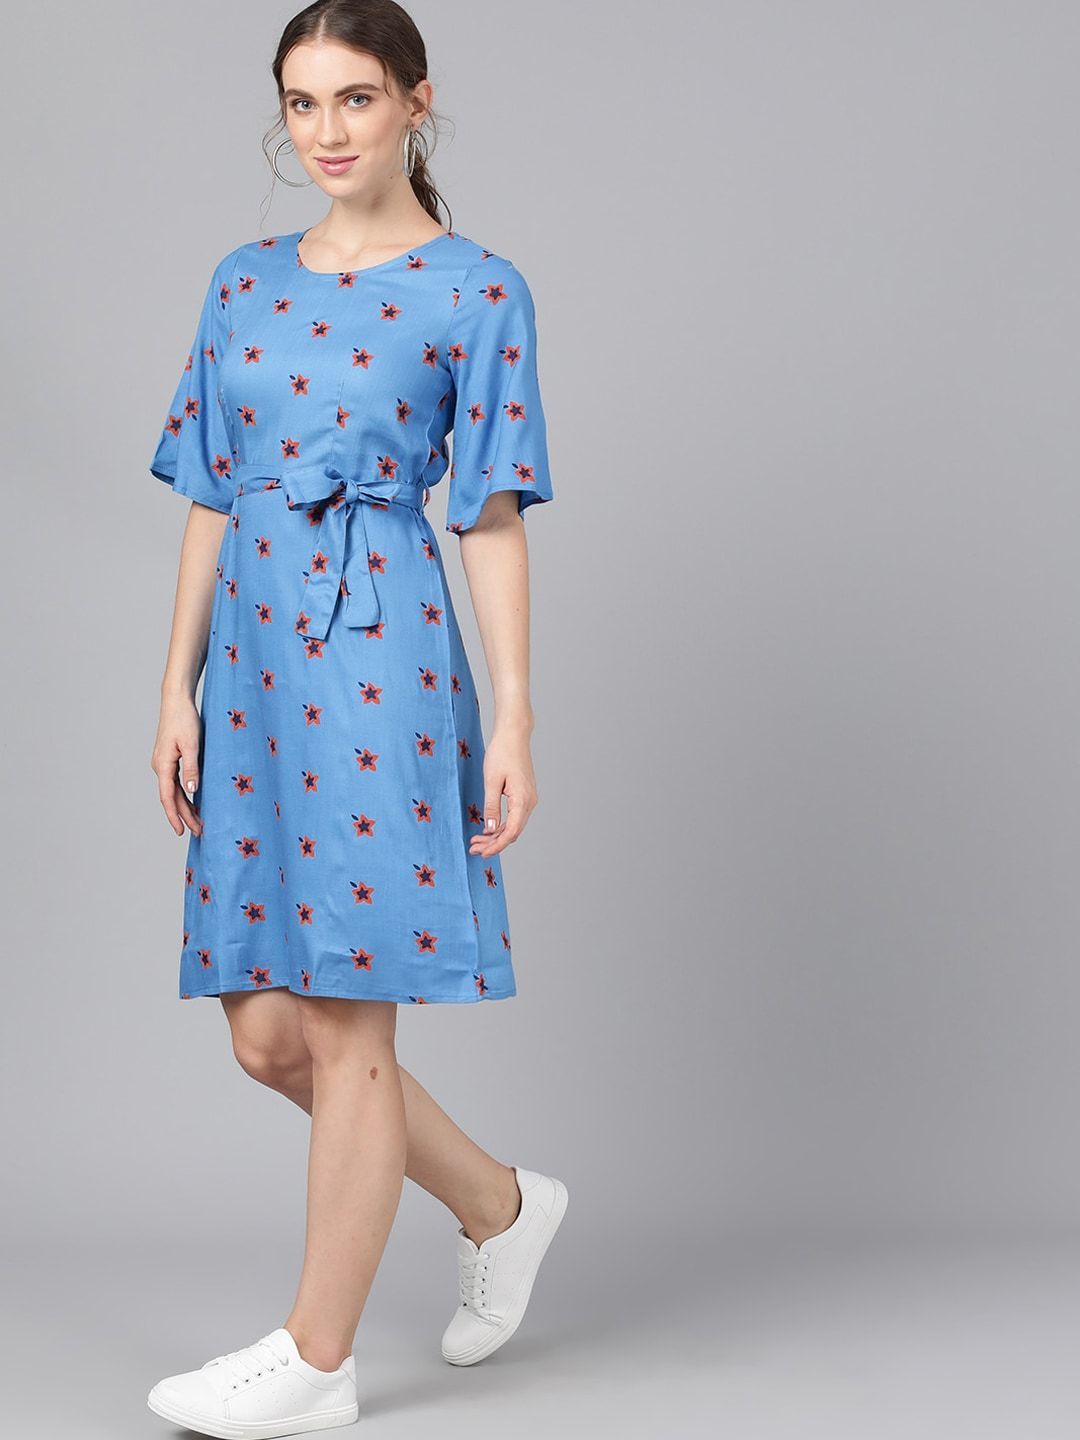 Women's  Blue & Maroon Printed Fit and Flare Dress - AKS